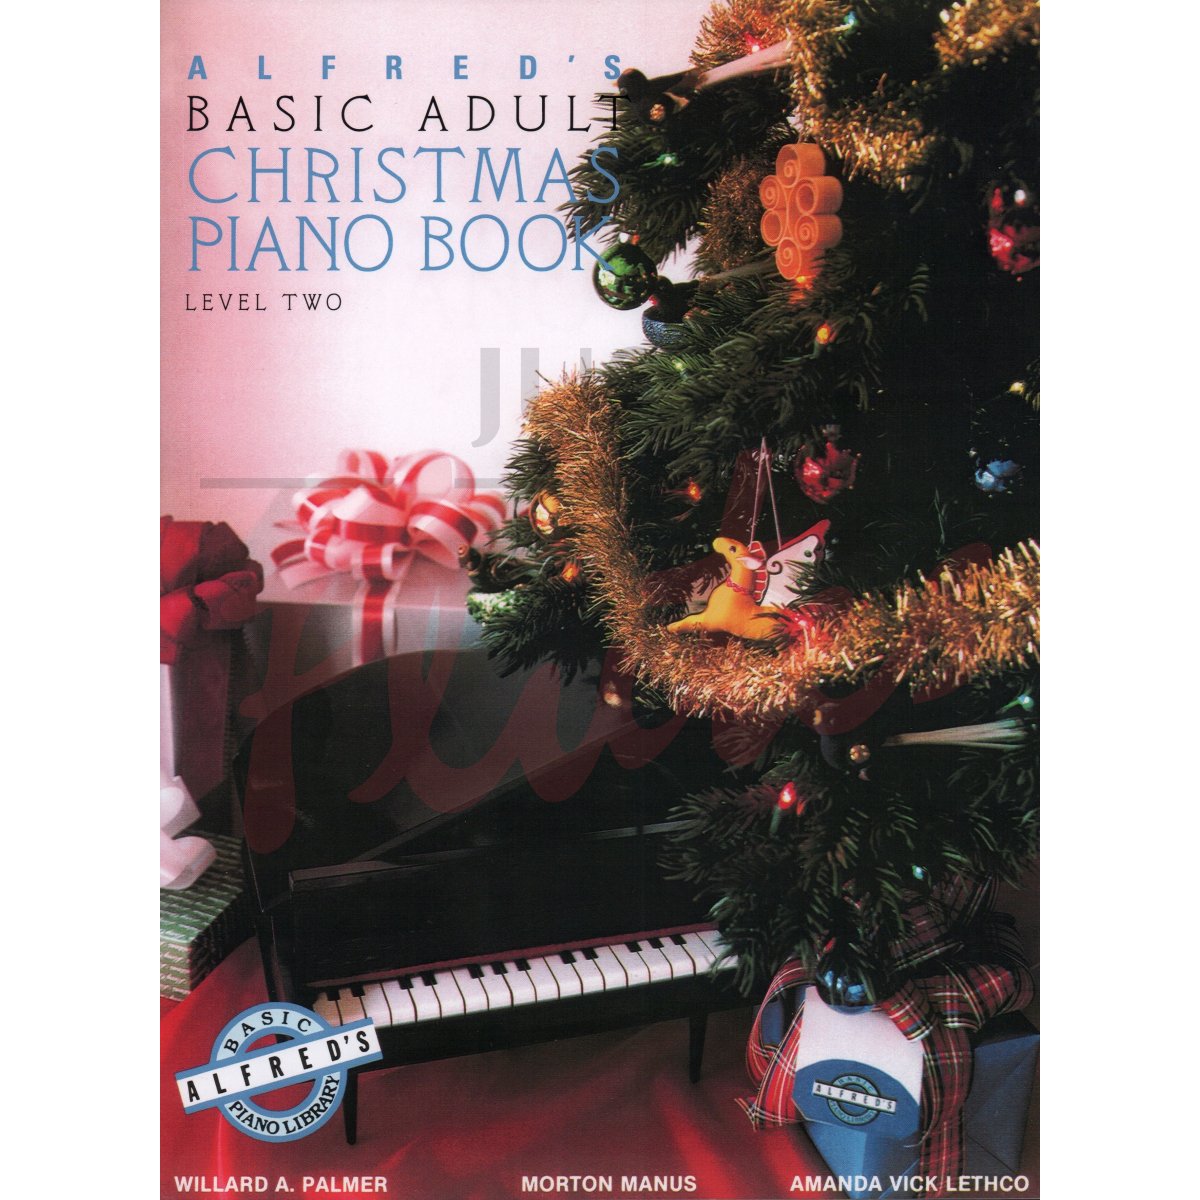 Alfred's Basic Adult Christmas Piano Book, Level 2